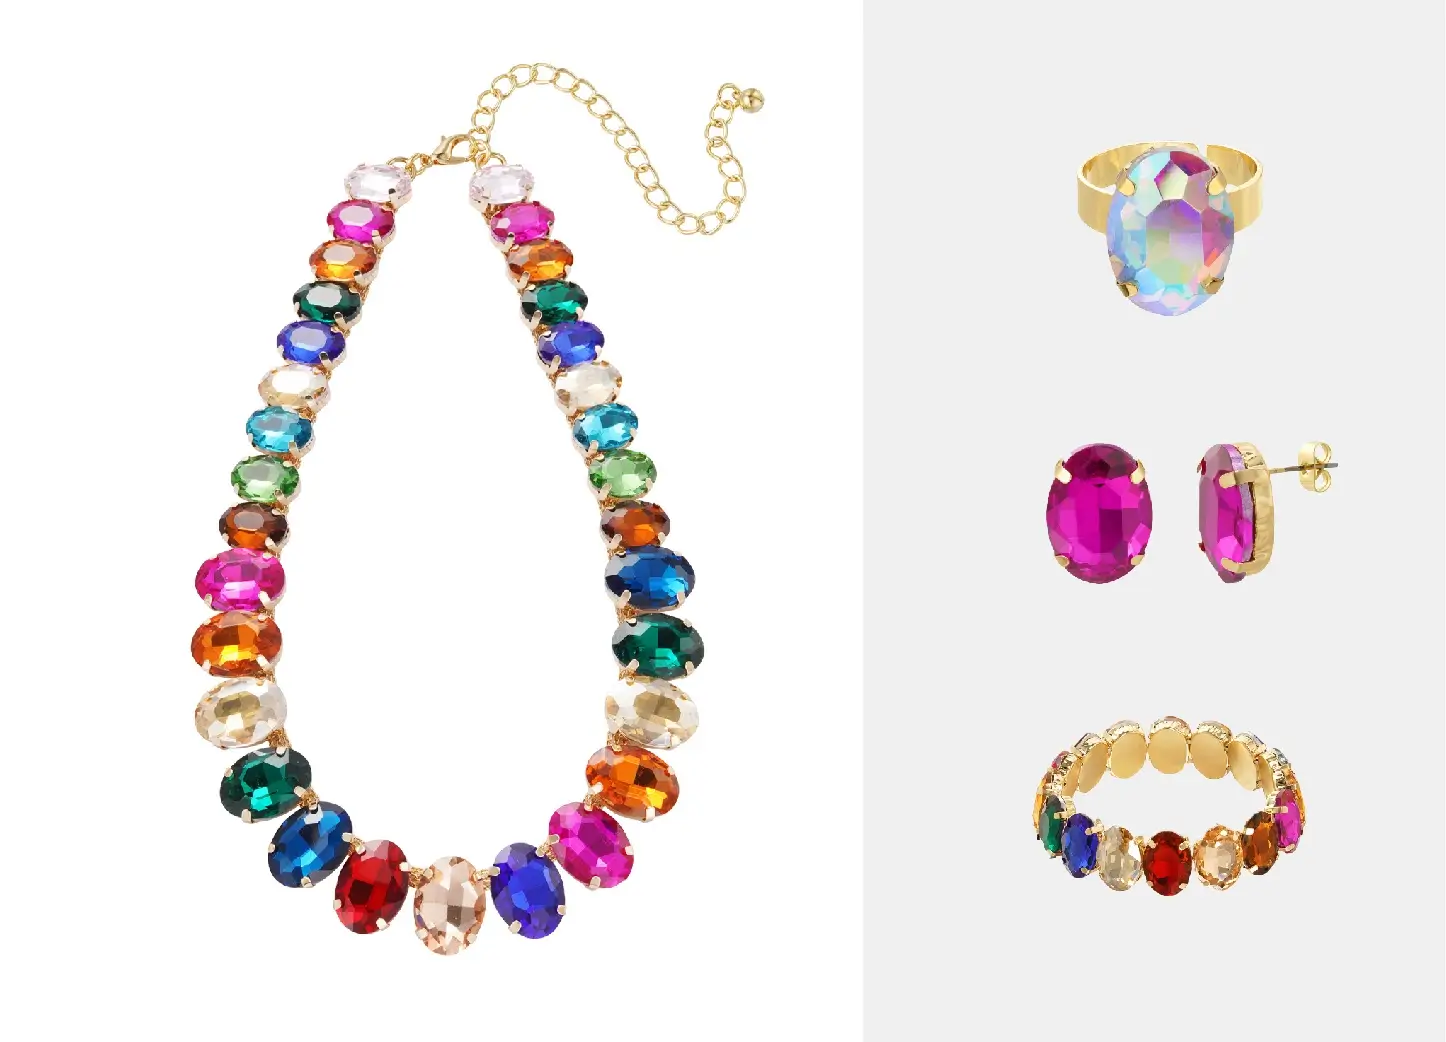 10 Quality Affordable Suppliers for Buying Wholesale Jewelry Online for  Resale Business